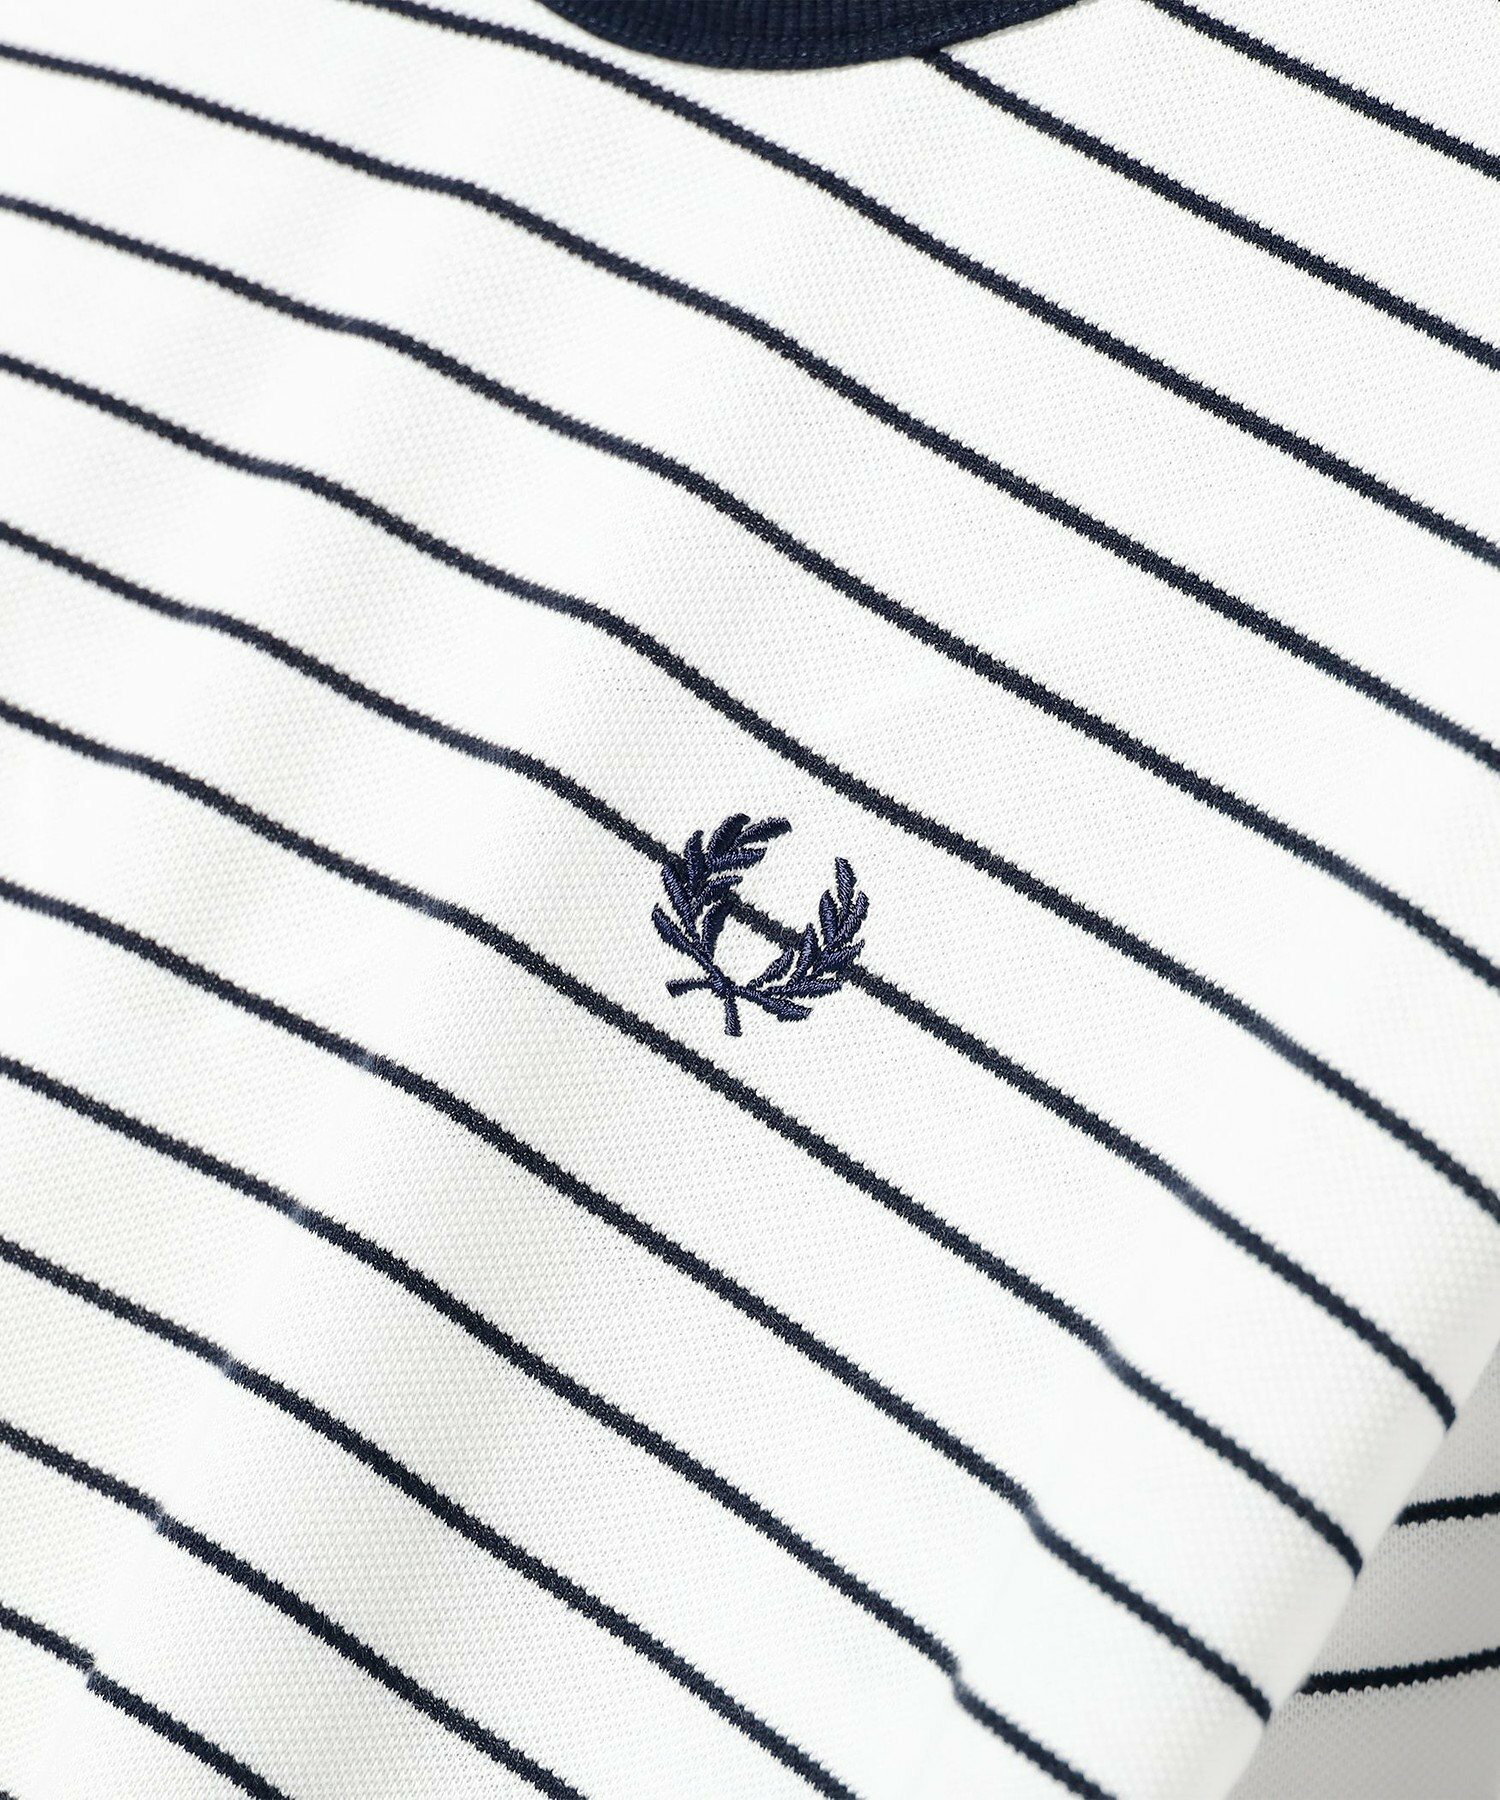 FRED PERRY * BEAMS / 別注 ボーダー ピケ Tシャツ